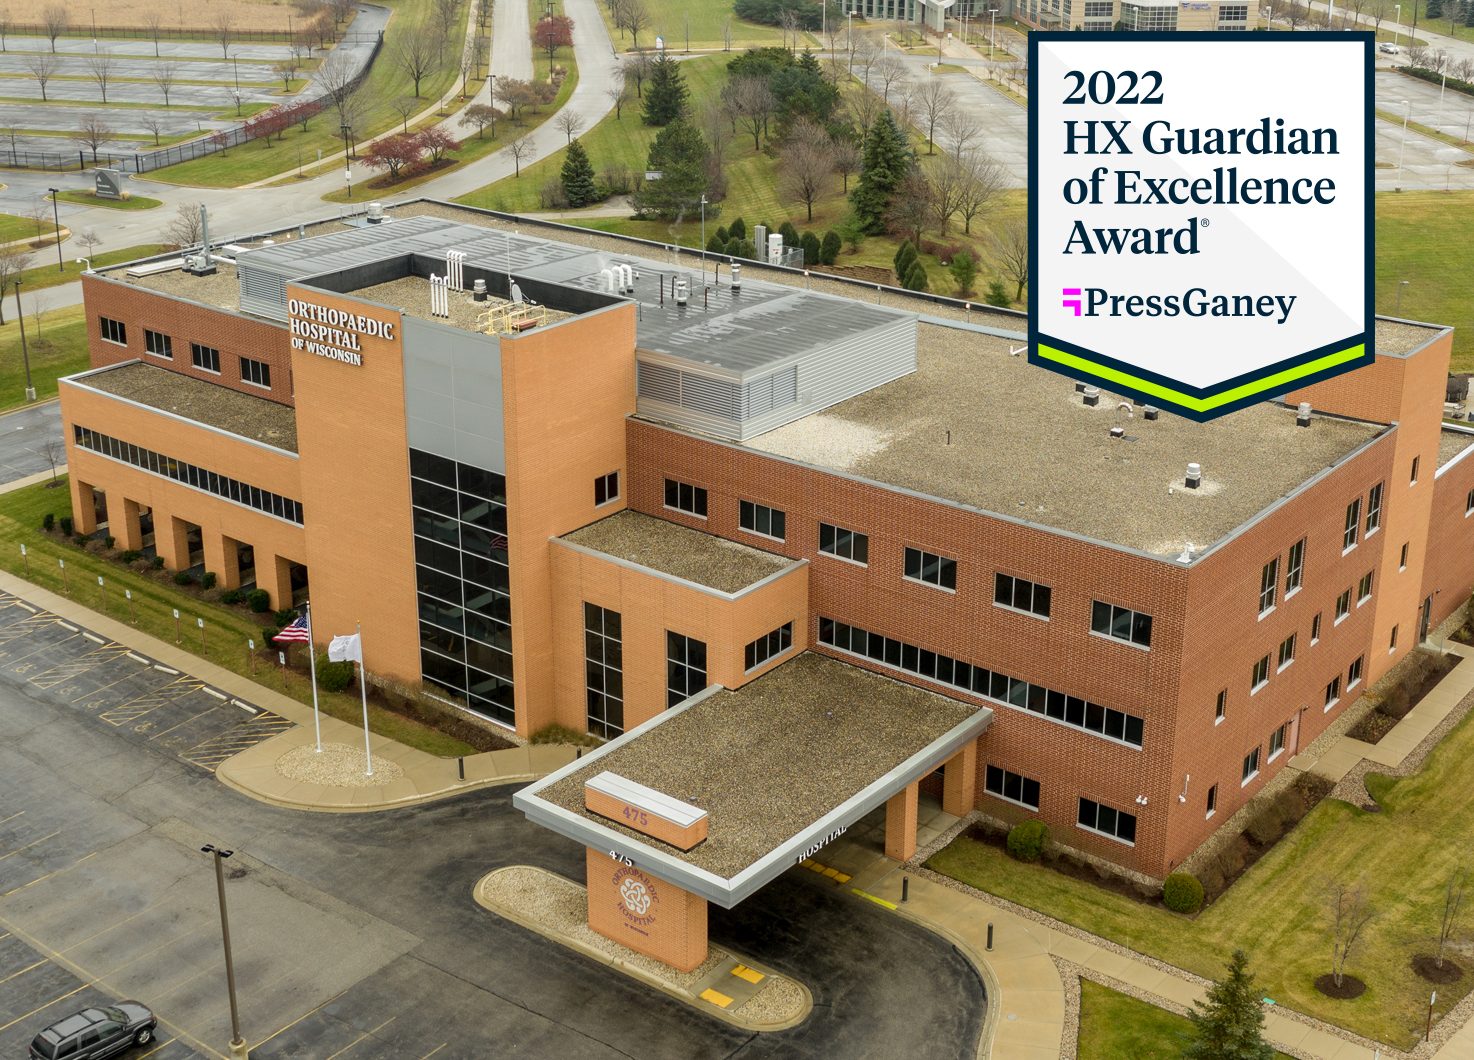 Orthopaedic Hospital of Wisconsin receives 2022 Press Ganey Human Experience Guardian of Excellence Award®